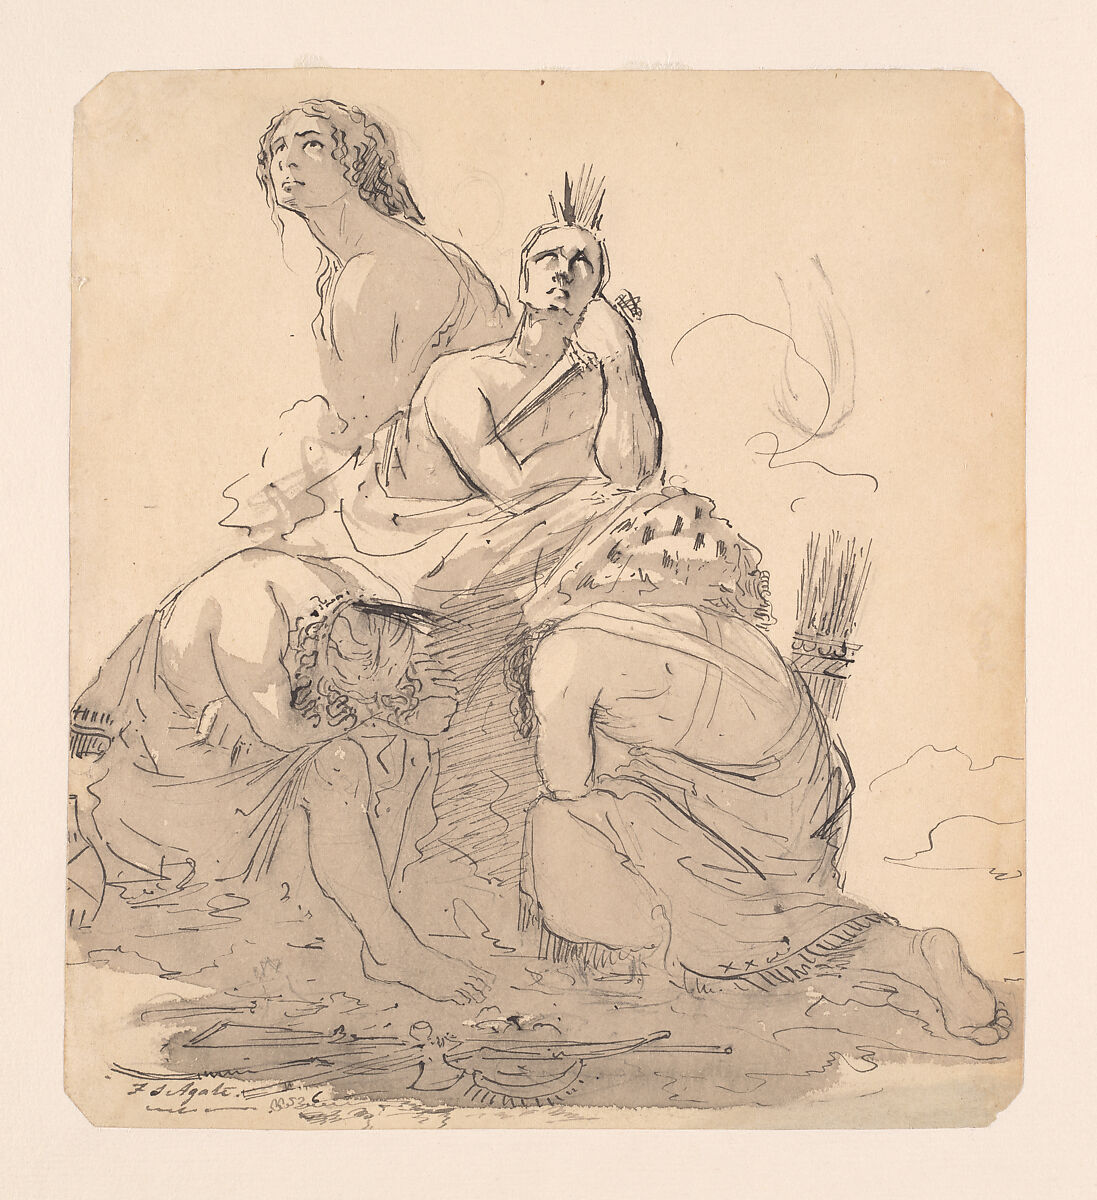 Indians Lamenting the Approach of the White Man (from McGuire Scrapbook), Frederick Stiles Agate (American, Sparta, New York 1803–1844 Sparta, New York), Pen and black ink, gray washes, and graphite on off-white wove paper, American 